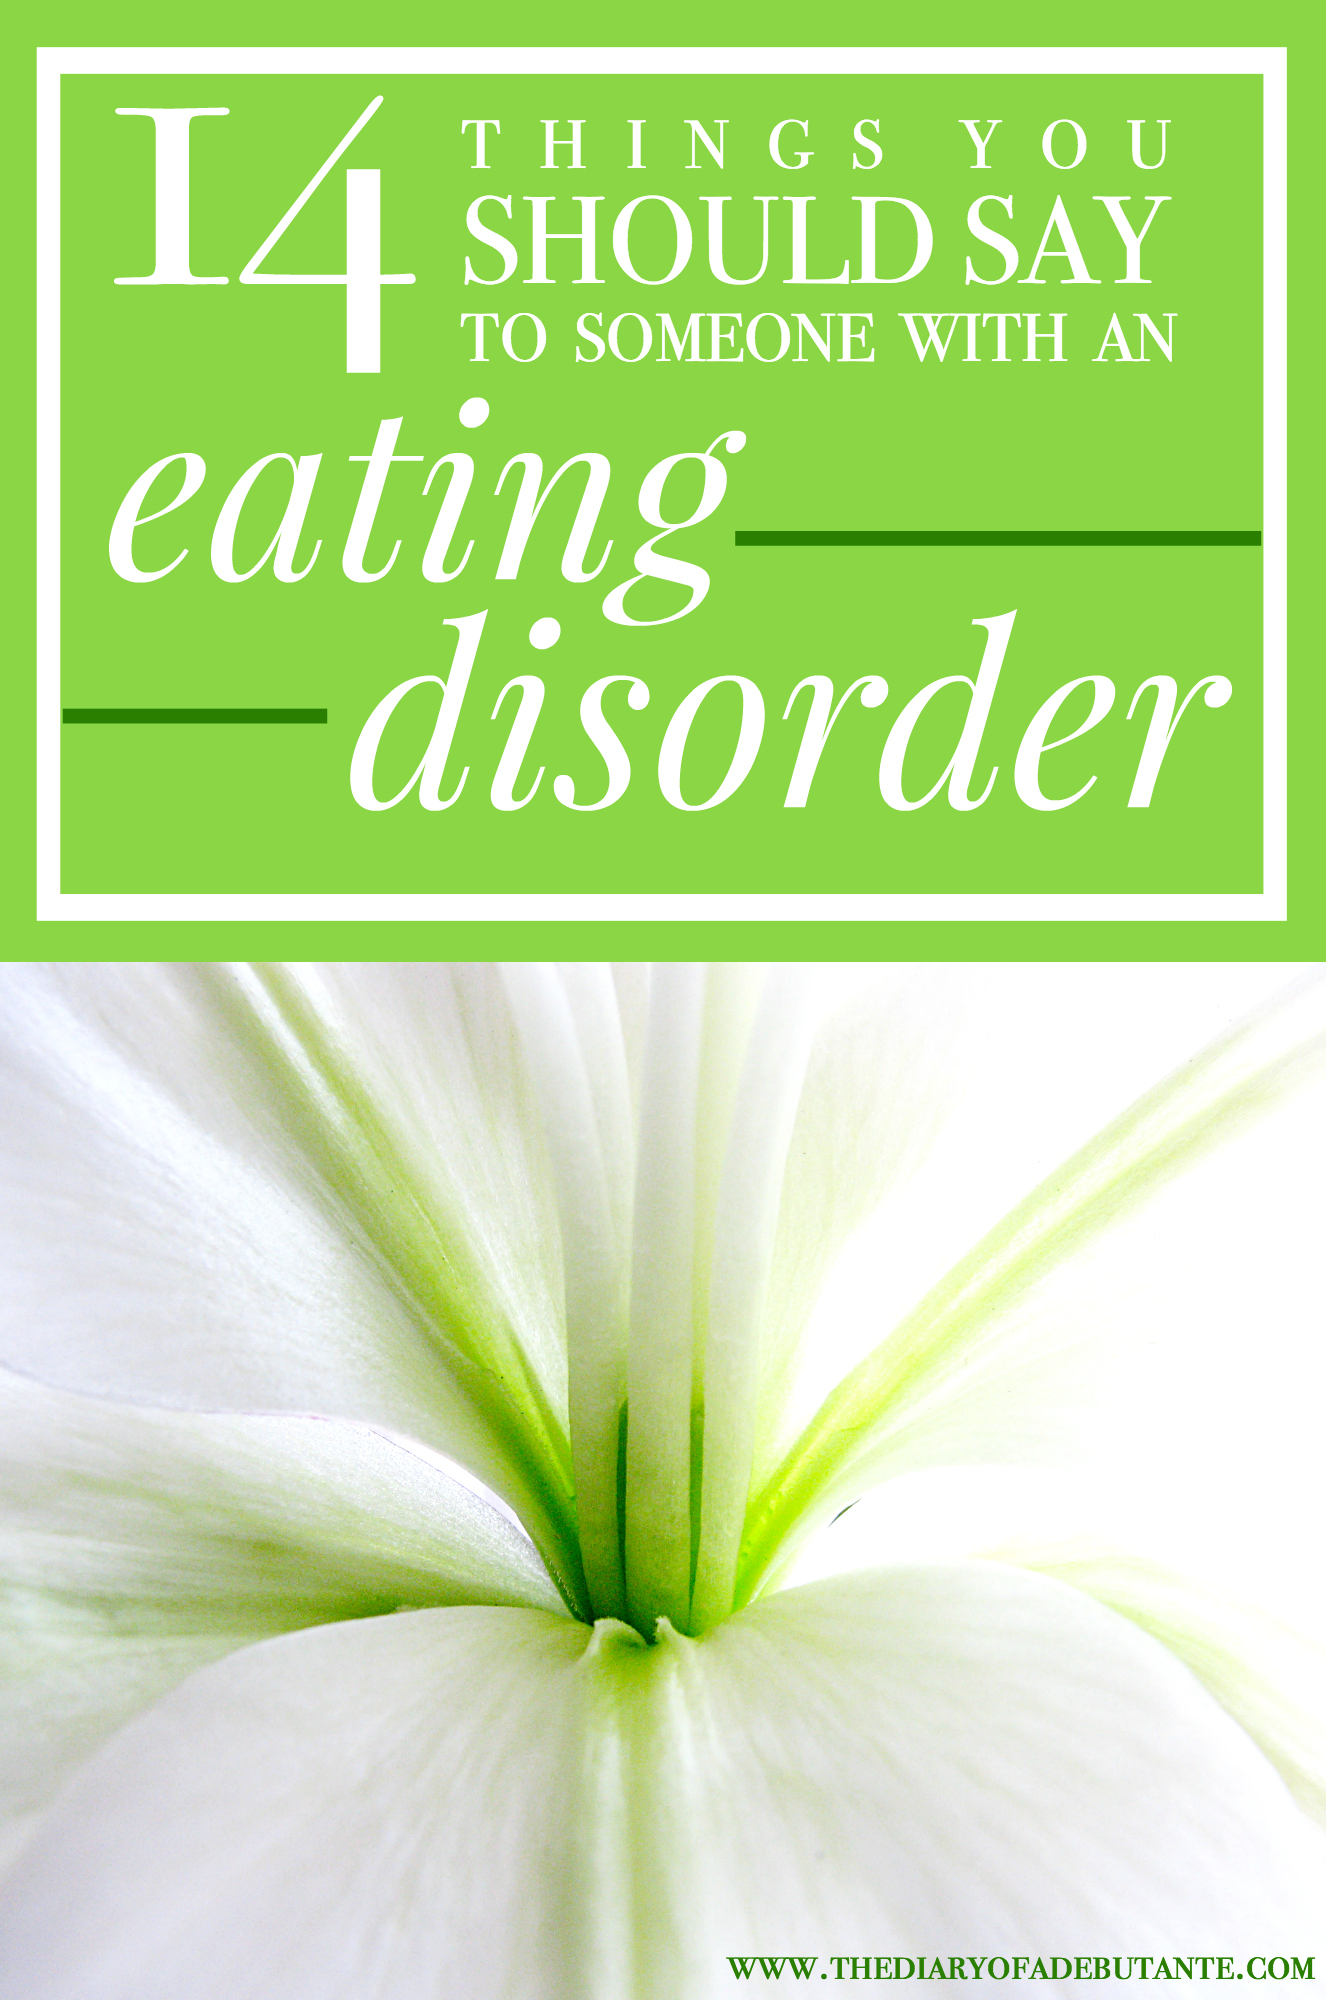 how to help someone with an eating disorder, 14 helpful things to say to someone with an eating disorder, how to help an eating disorder, eating disorders, Stephanie Ziajka, Diary of a Debutante, eating disorder awareness